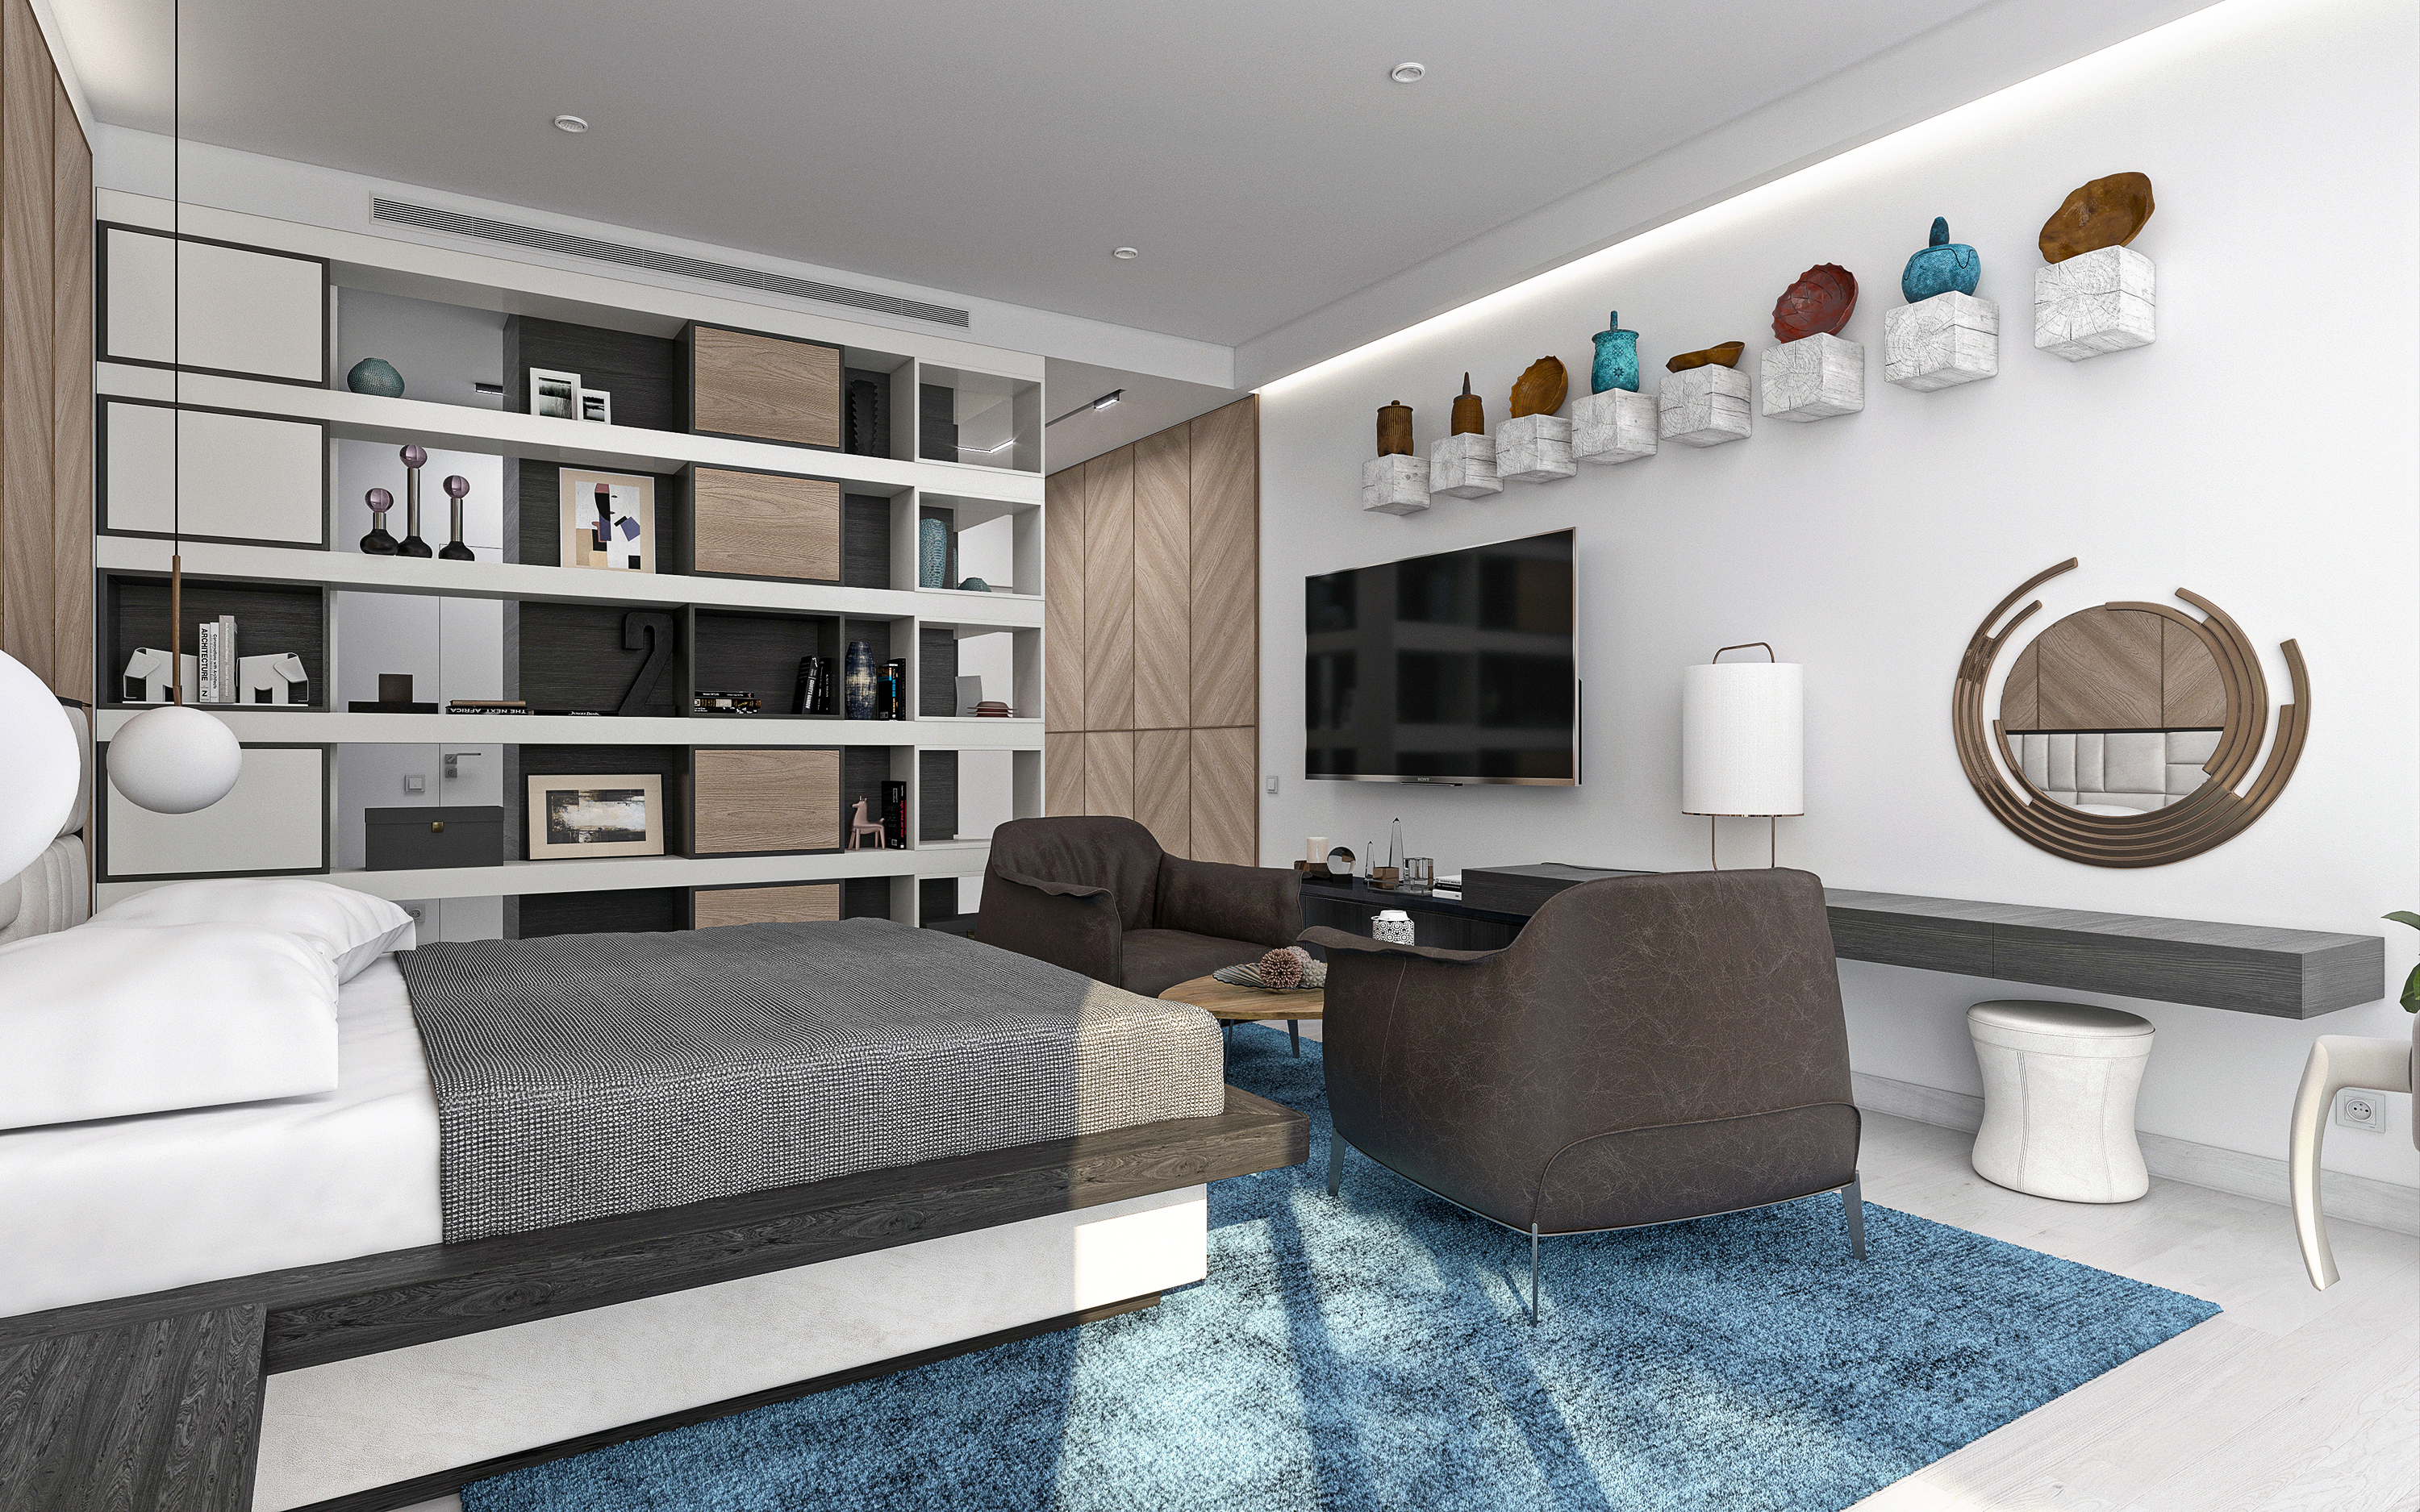 Penthouse S318 in 3d max corona render image